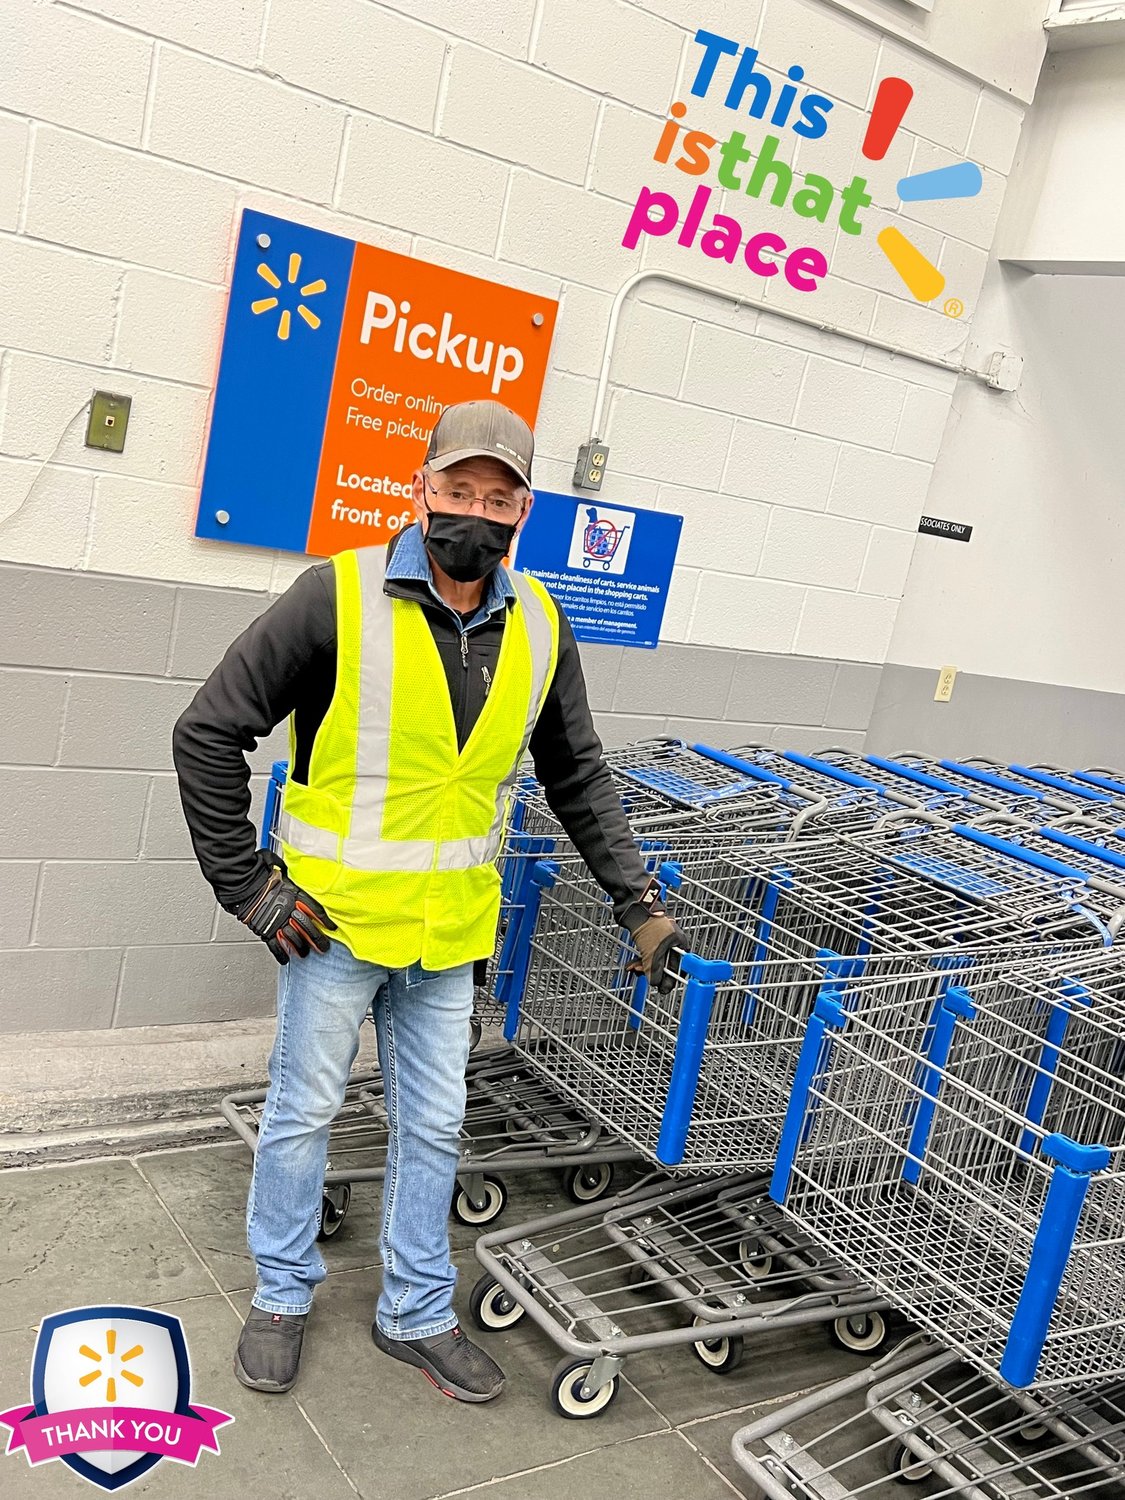 Tim has been with Walmart for over 19 years.